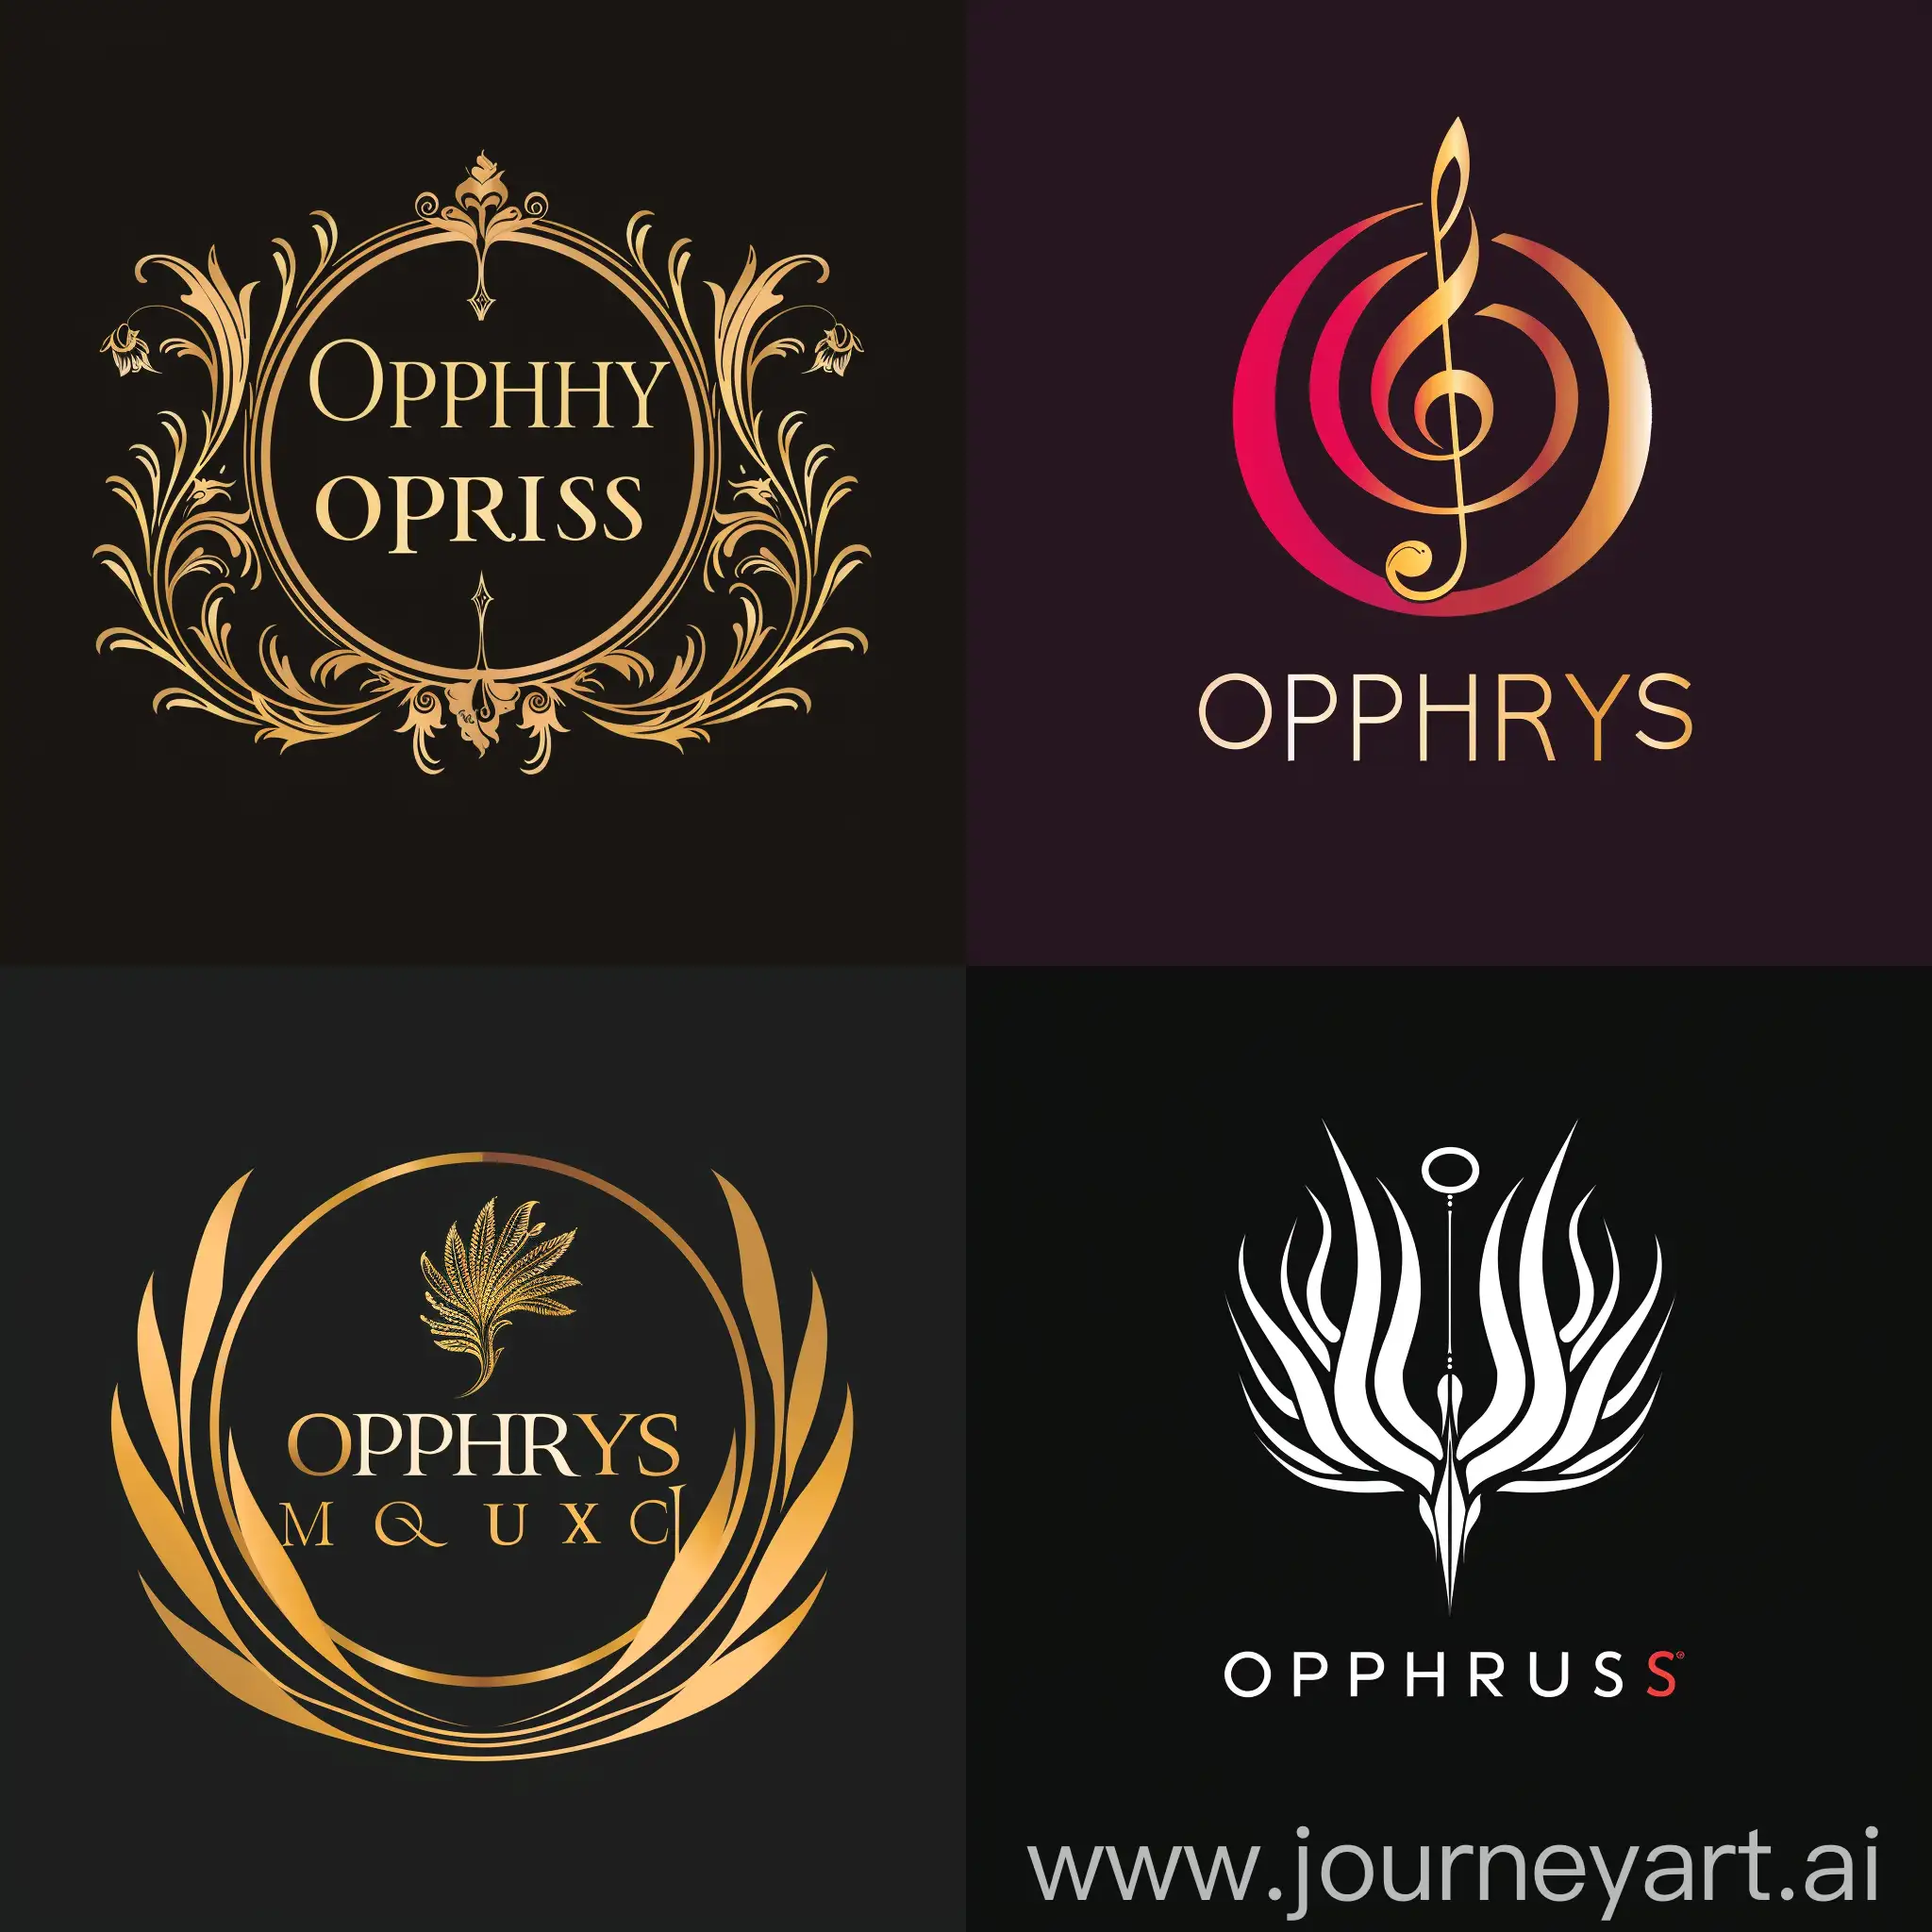 "Ophrys music" logo